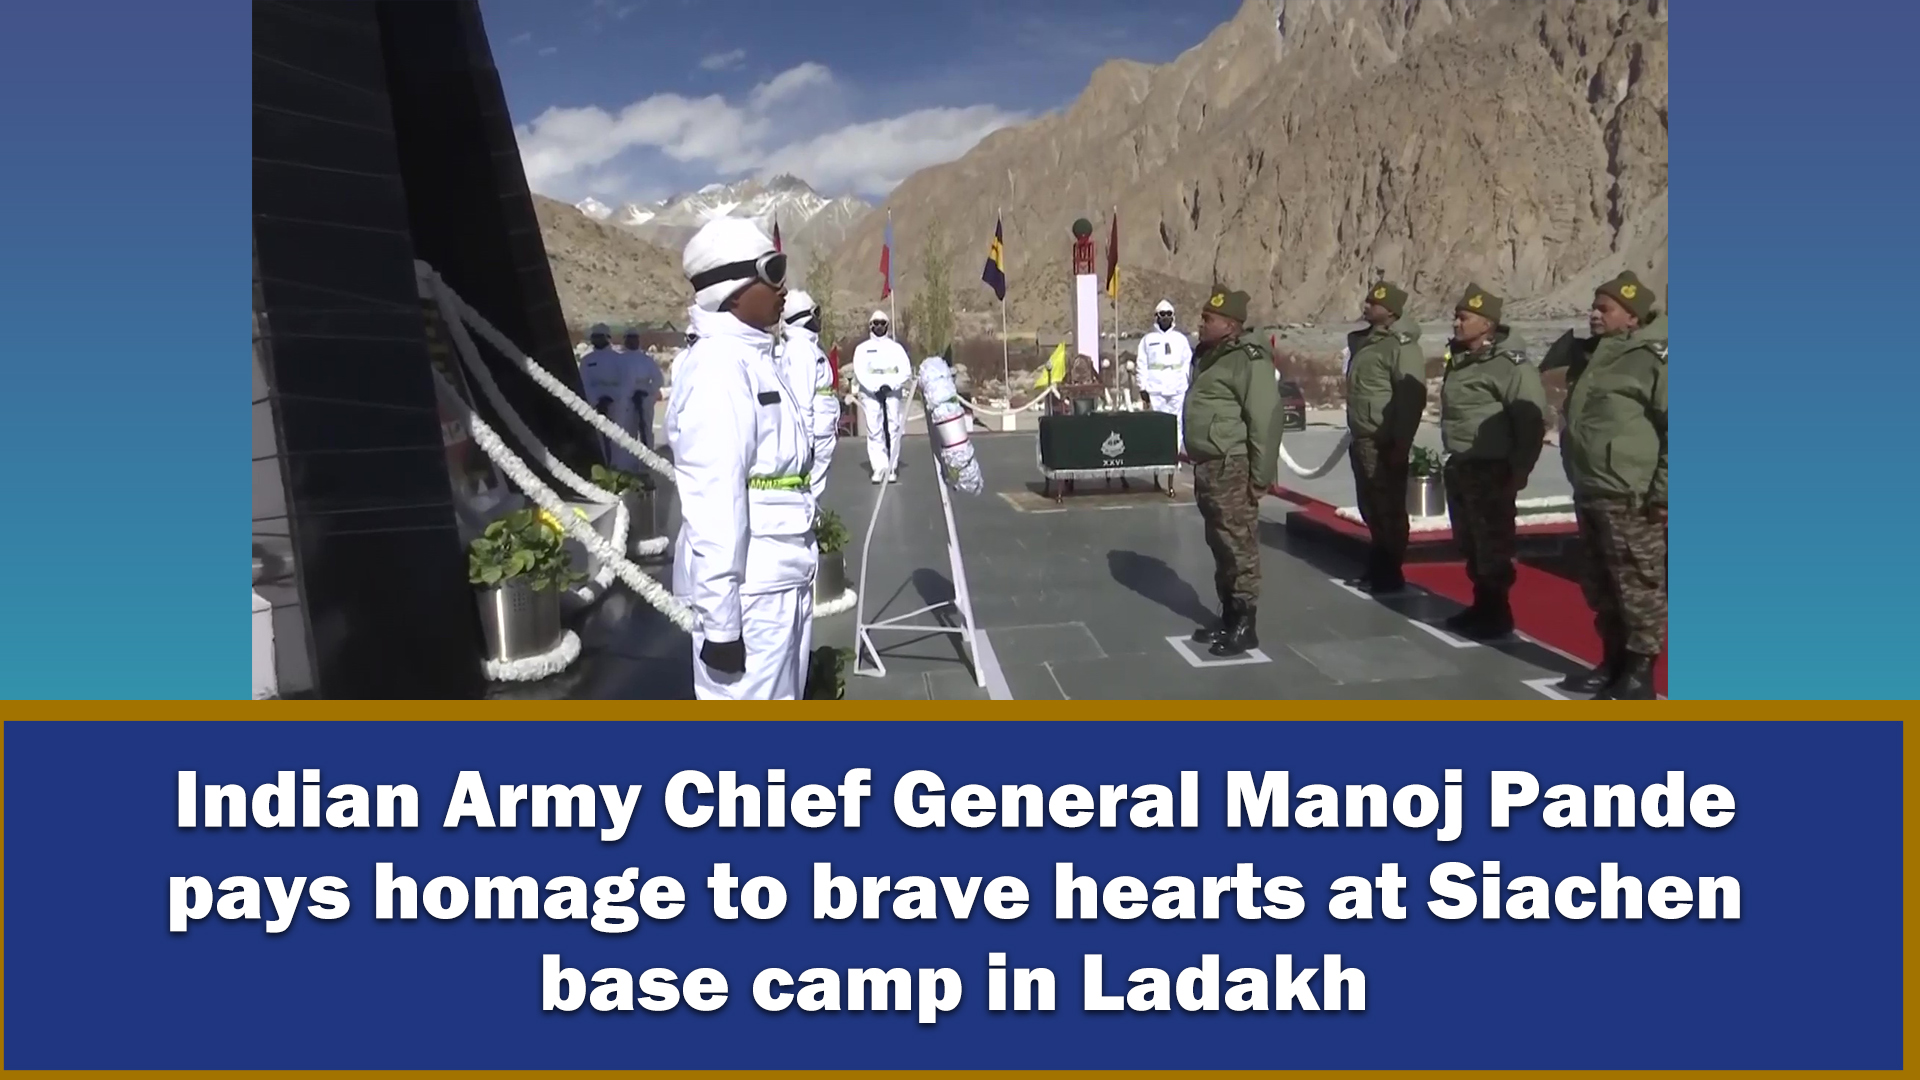 Indian Army Chief General Manoj Pande pays homage to brave hearts at Siachen base camp in Ladakh